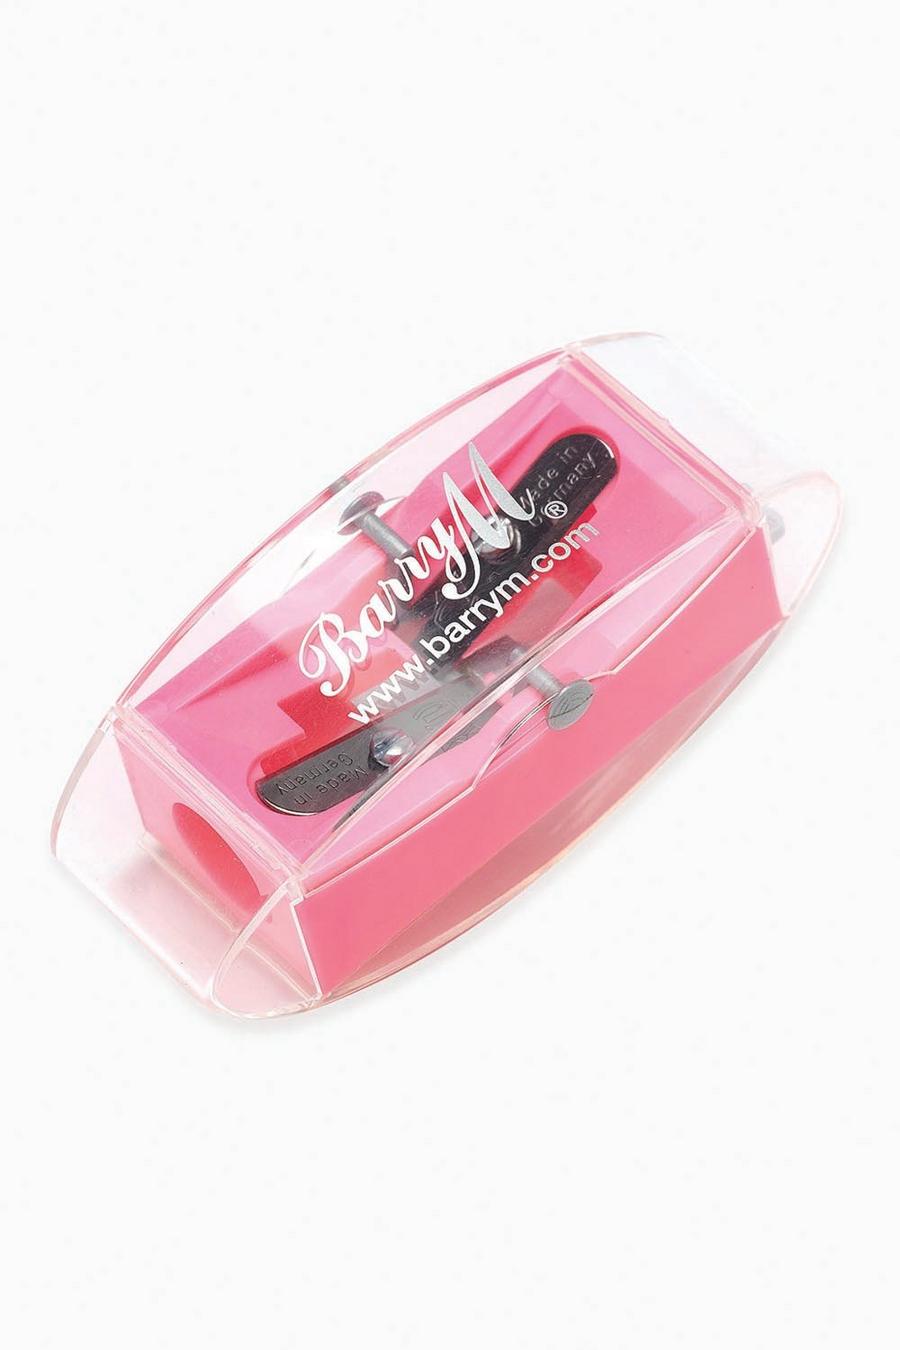 Barry M Spitzer, Rosa pink